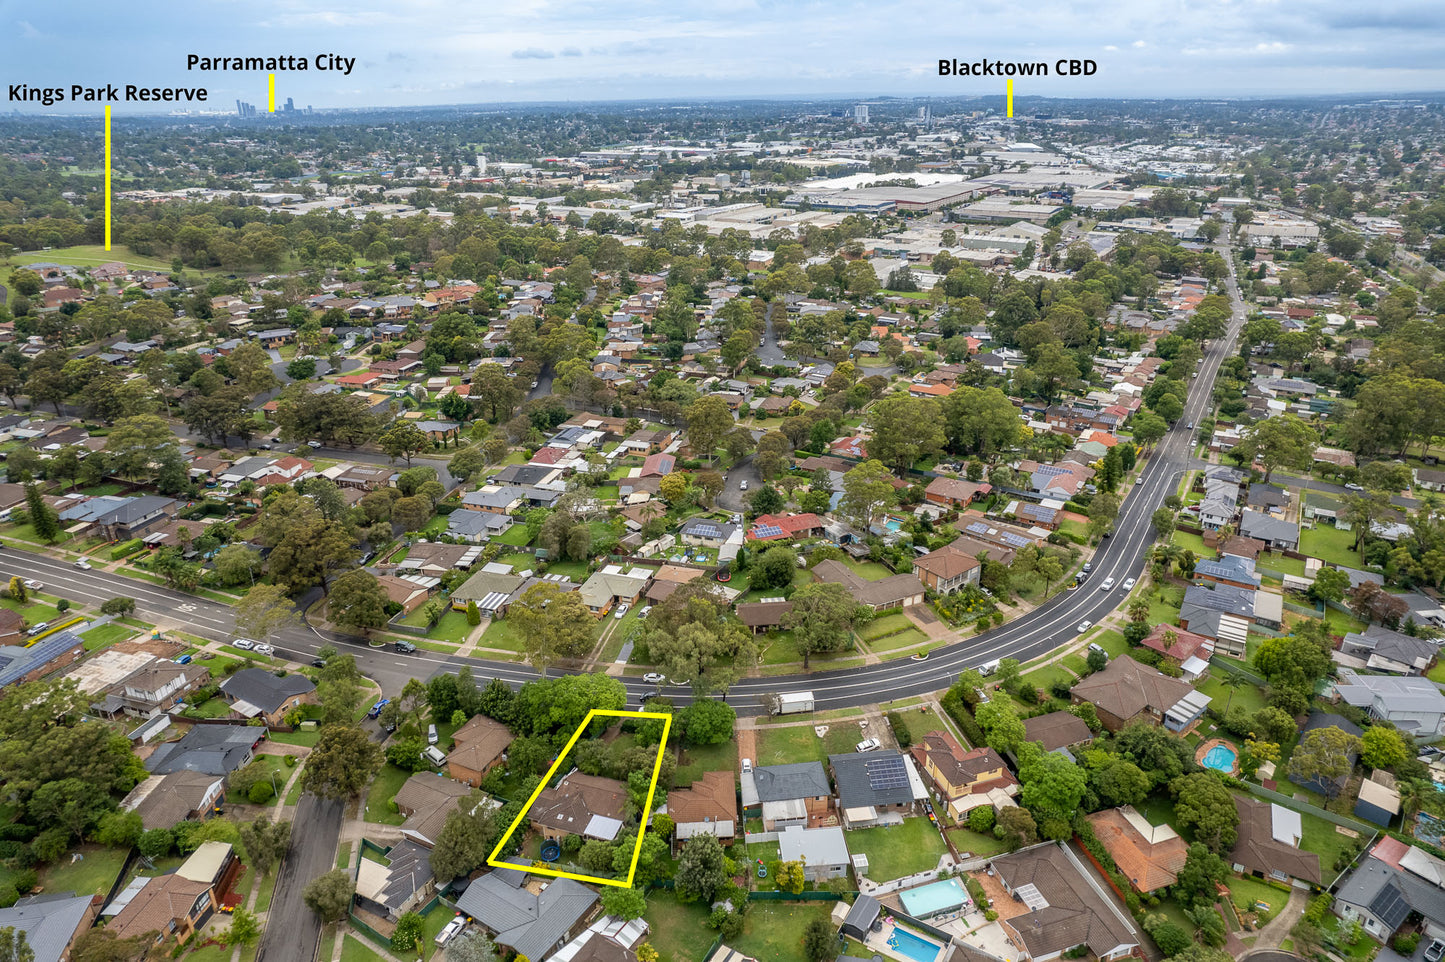 86 Madagascar Drive, Kings Park, NSW 2148 - SOLD $890,000.00